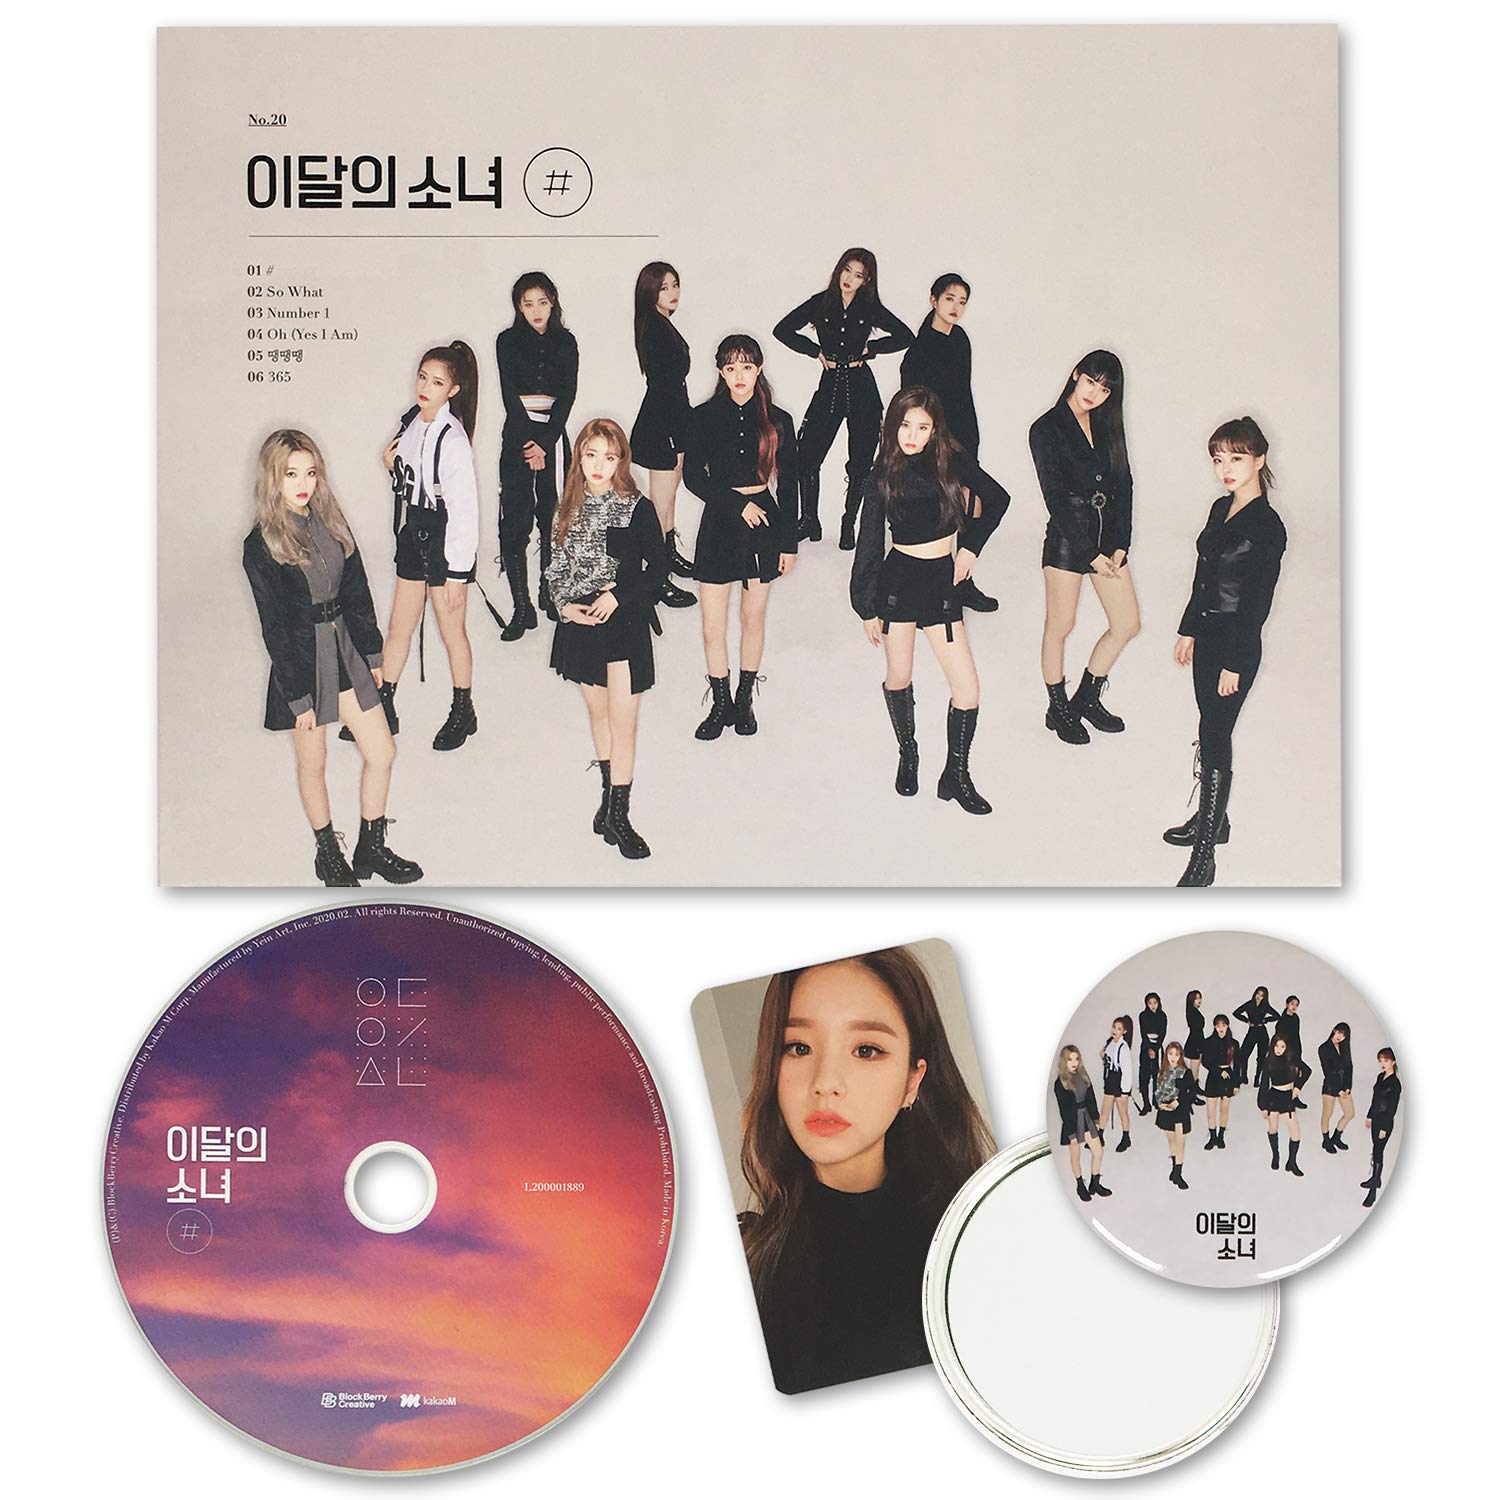 LOONA - [ # ] (Hashtag) (Limited Edition)